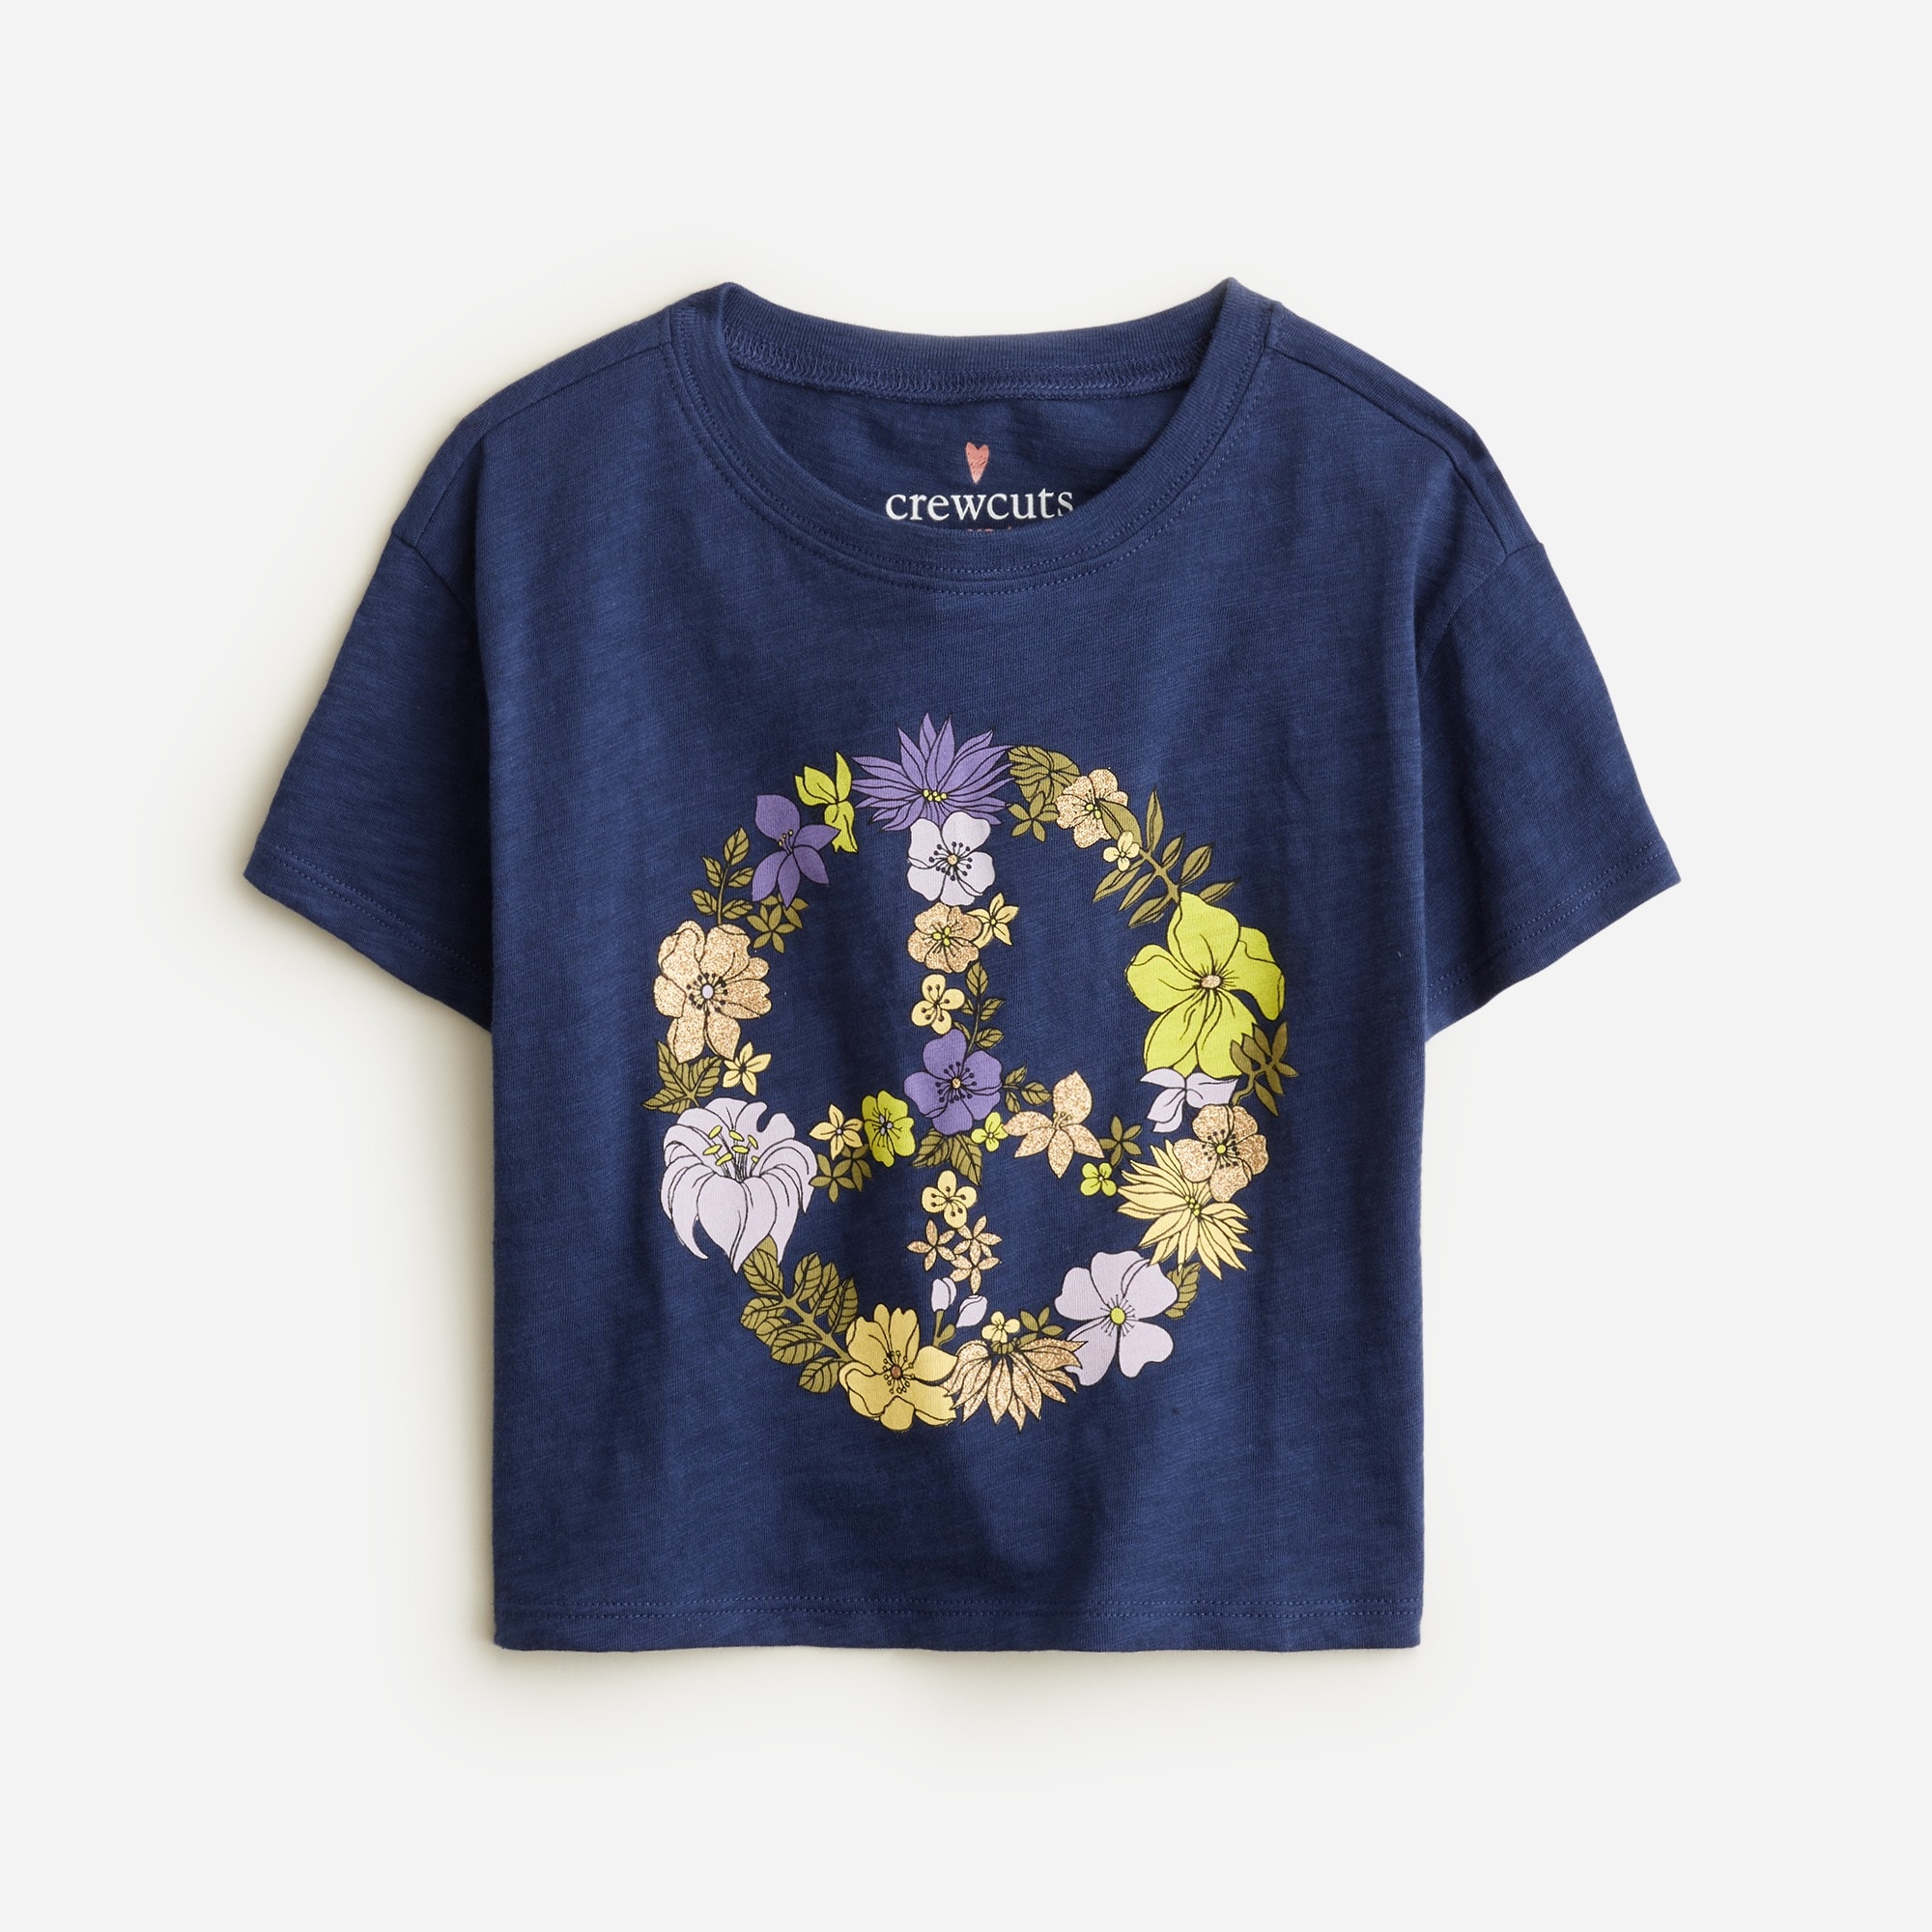  Girls' cropped peace sign graphic T-shirt with glitter